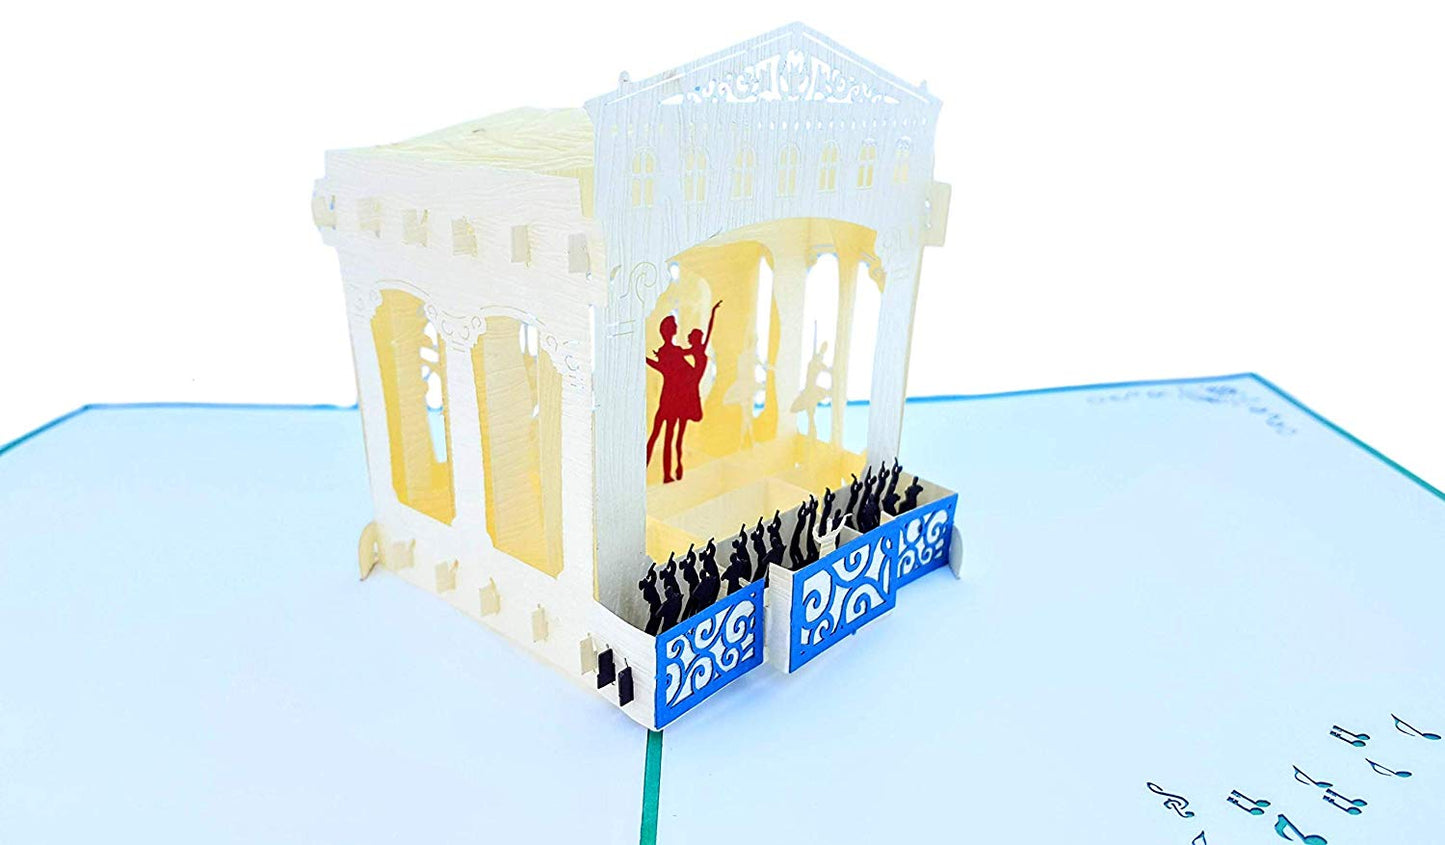 Nutcracker 3D Pop Up Greeting Card - Christmas - iGifts And Cards